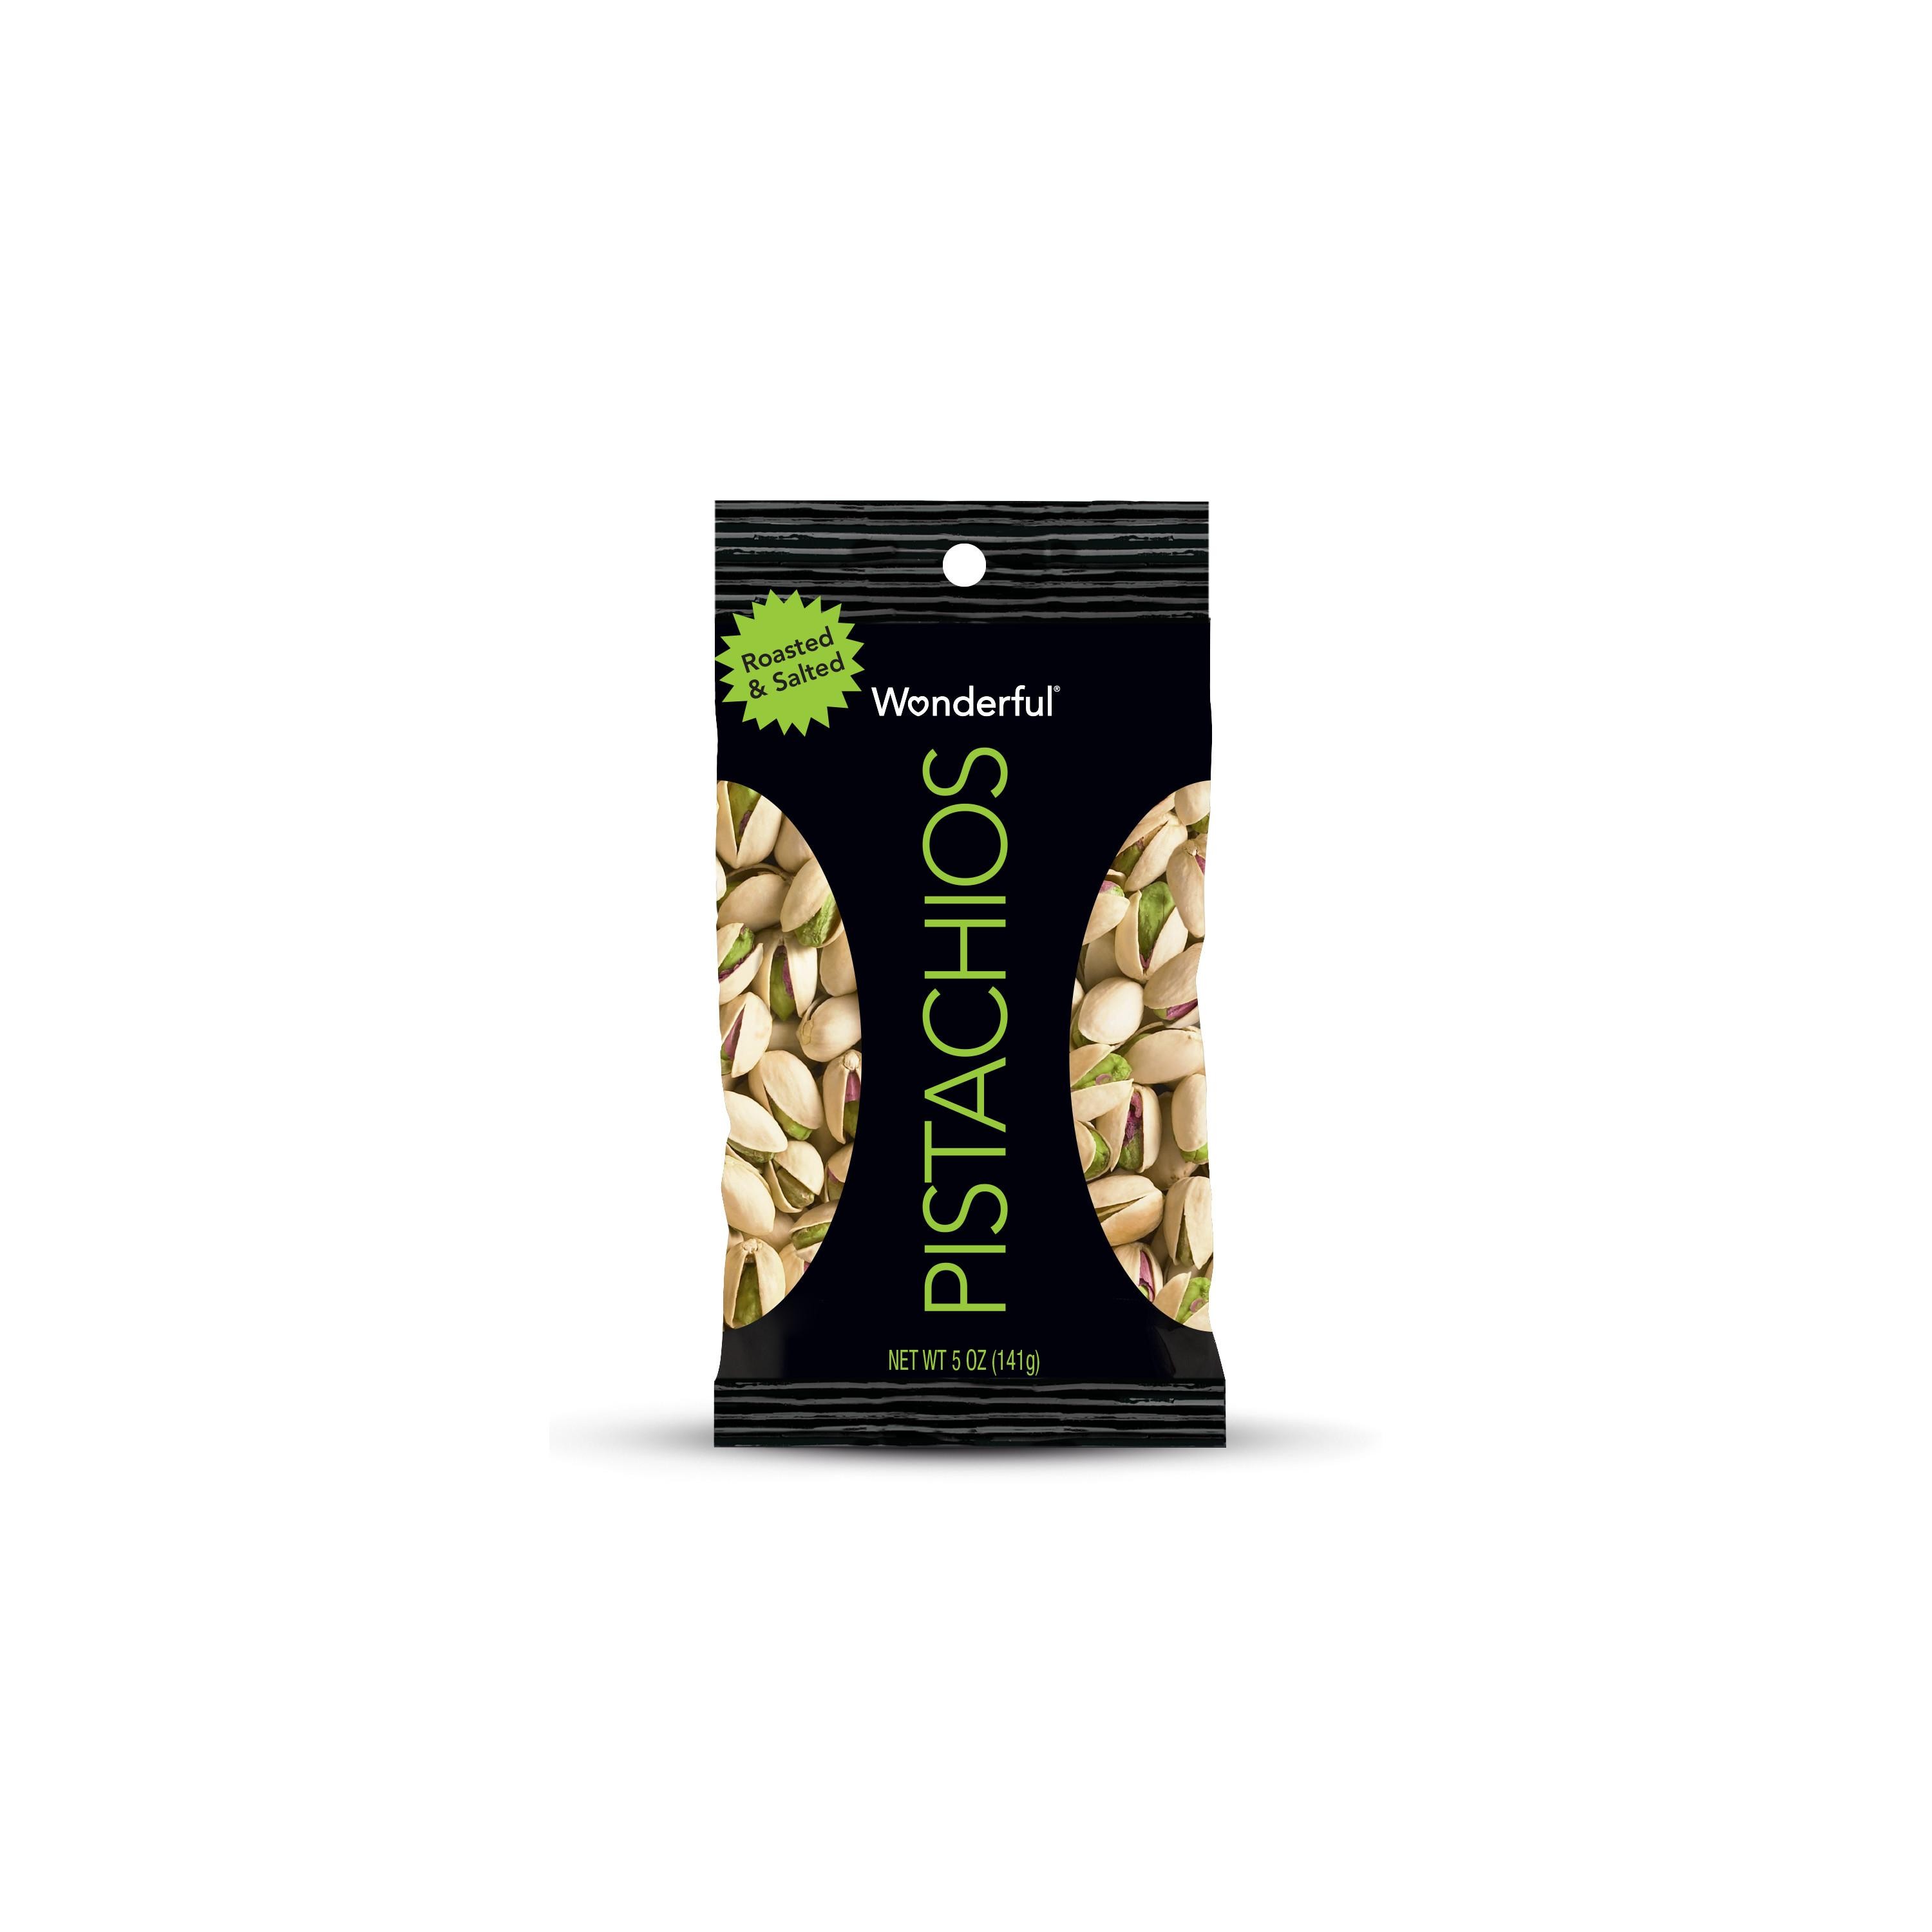 Paramount Farms PAR072142WTV Wonderful 5 Oz. Dry Roasted and Salted Pistachios (8 Packs/Box)